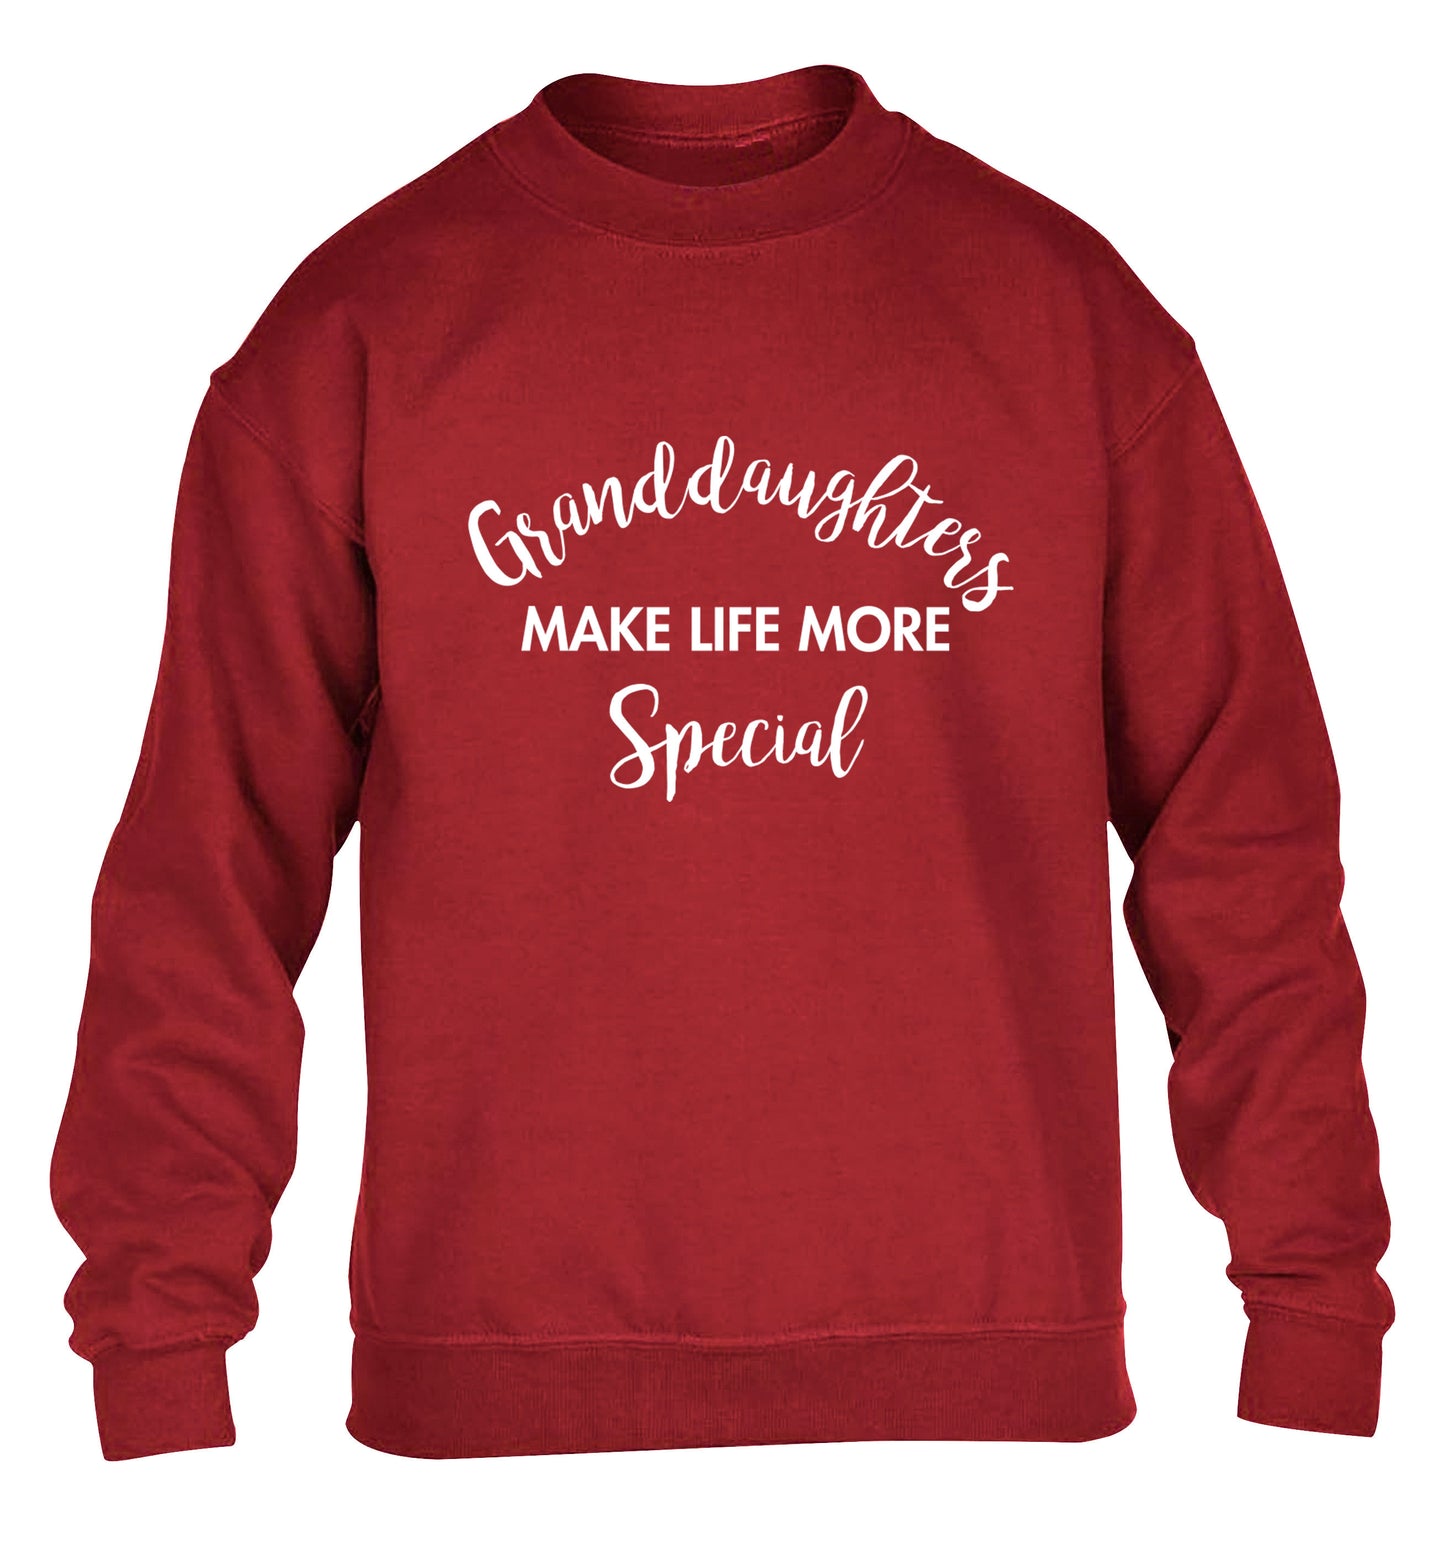 Granddaughters make life more special children's grey sweater 12-14 Years